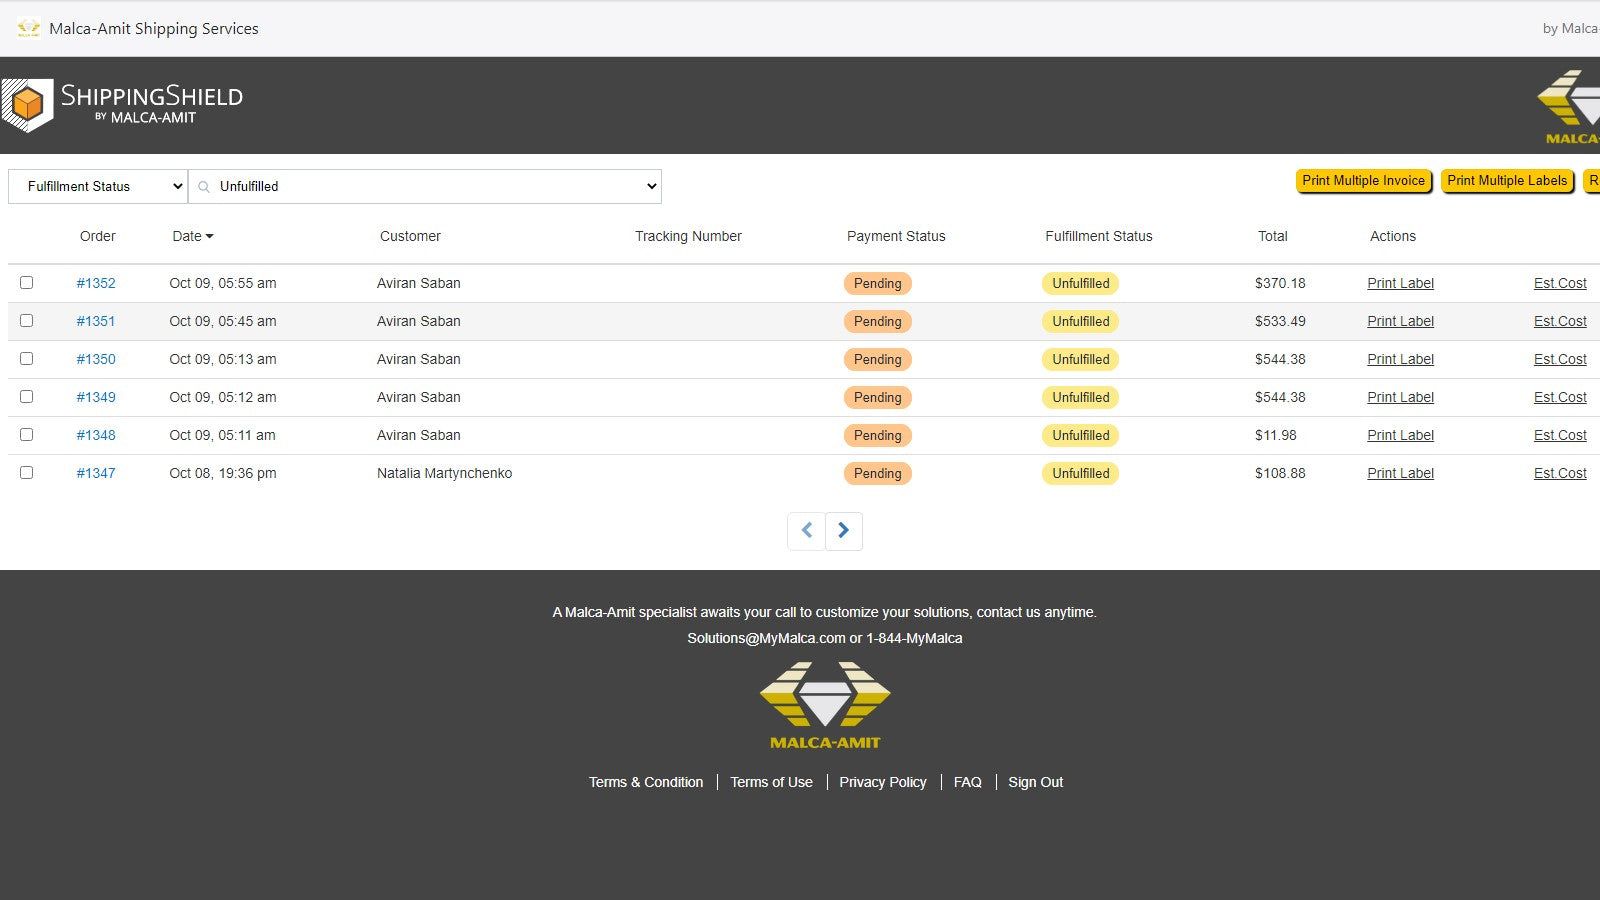 Malca-Amit Shipping Services Order Dashboard